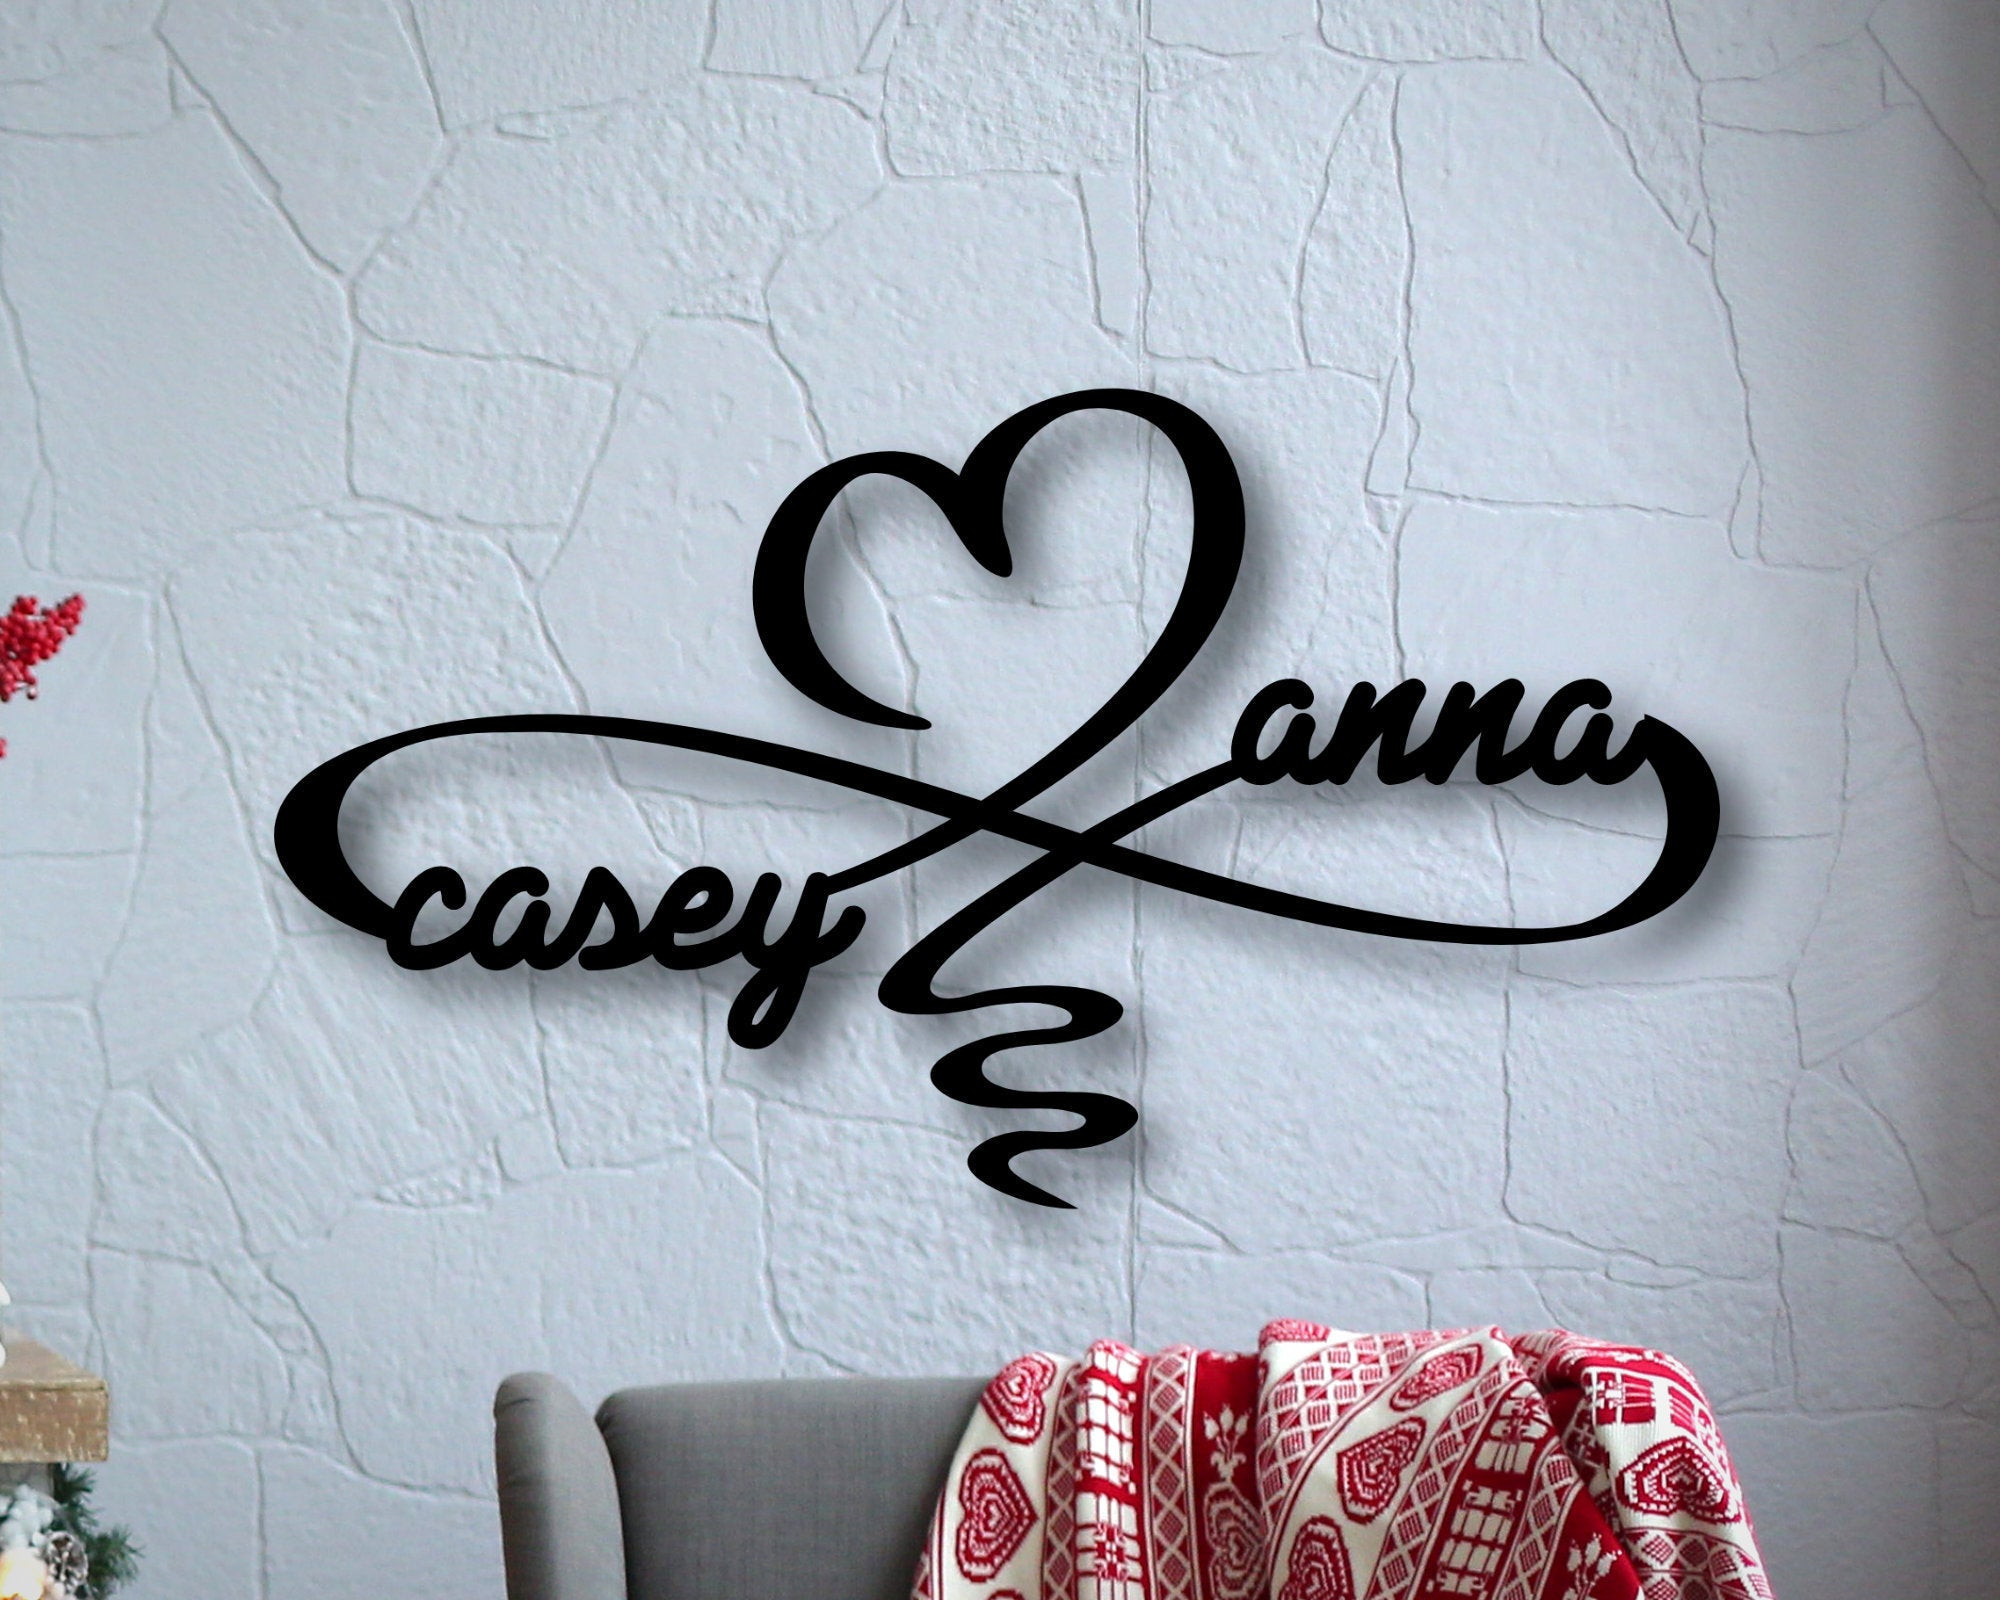 Personalized Metal Infinity Heart Sign, Custom Wedding Gift, Couple Names Heart Shape Wall Hanging, Door Hanger Home Decor, Laser Cut Metal Signs Custom Gift Ideas 12x12IN